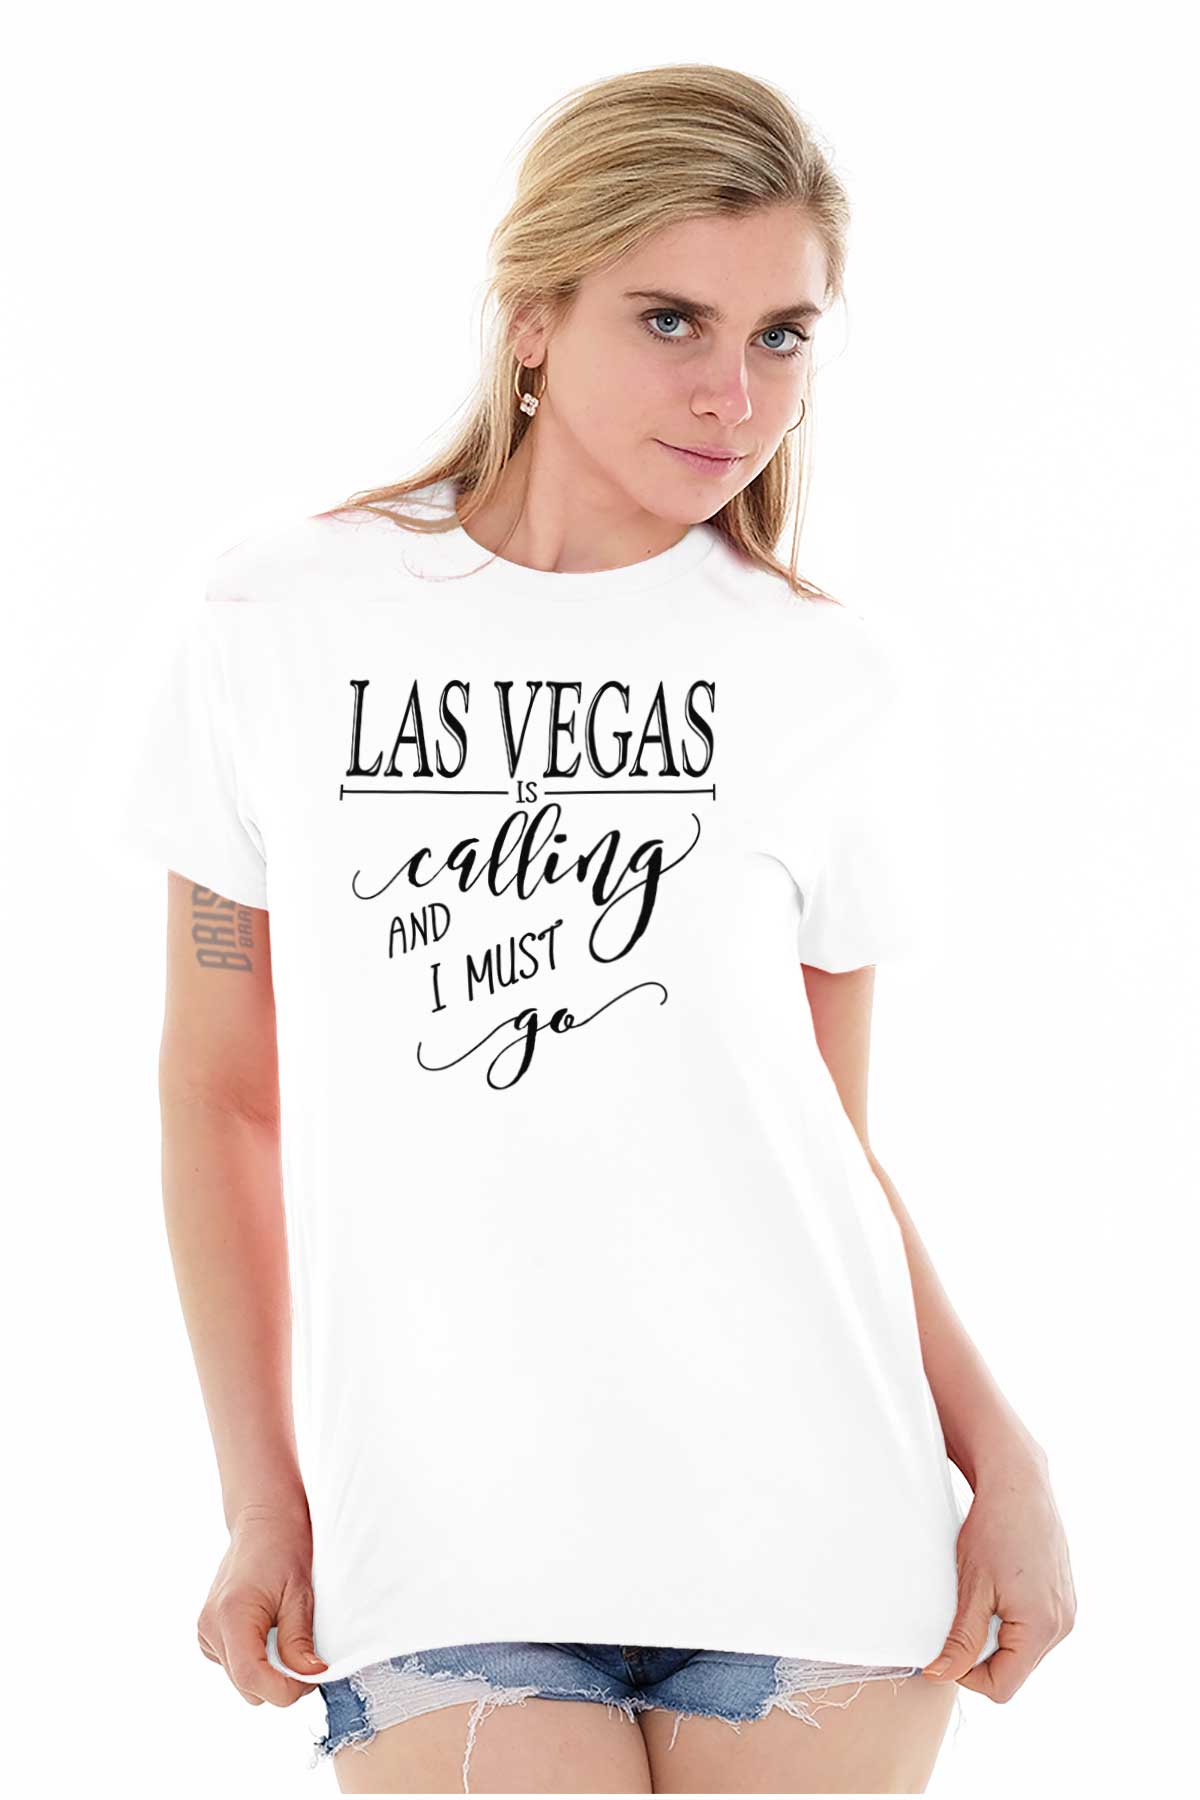 Las Vegas is Calling I Must Go Women's Graphic T Shirt Tees Brisco Brands 3X - image 5 of 5